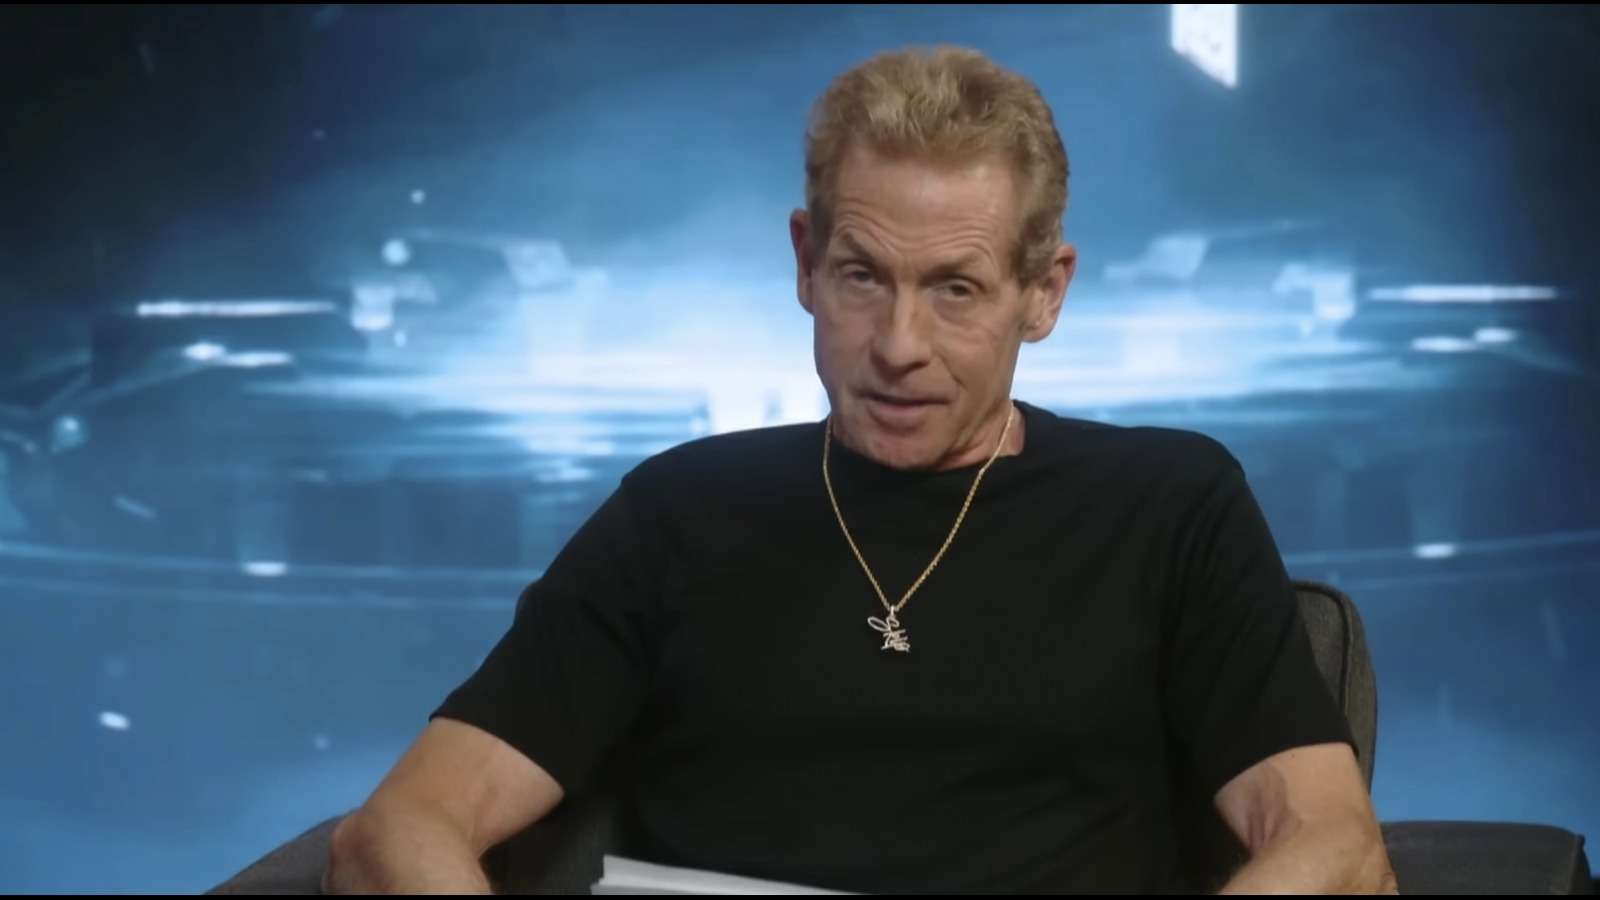 Skip Bayless sent waves around the NFL fan base on Friday after choosing who he believes is the best quarterback in the league